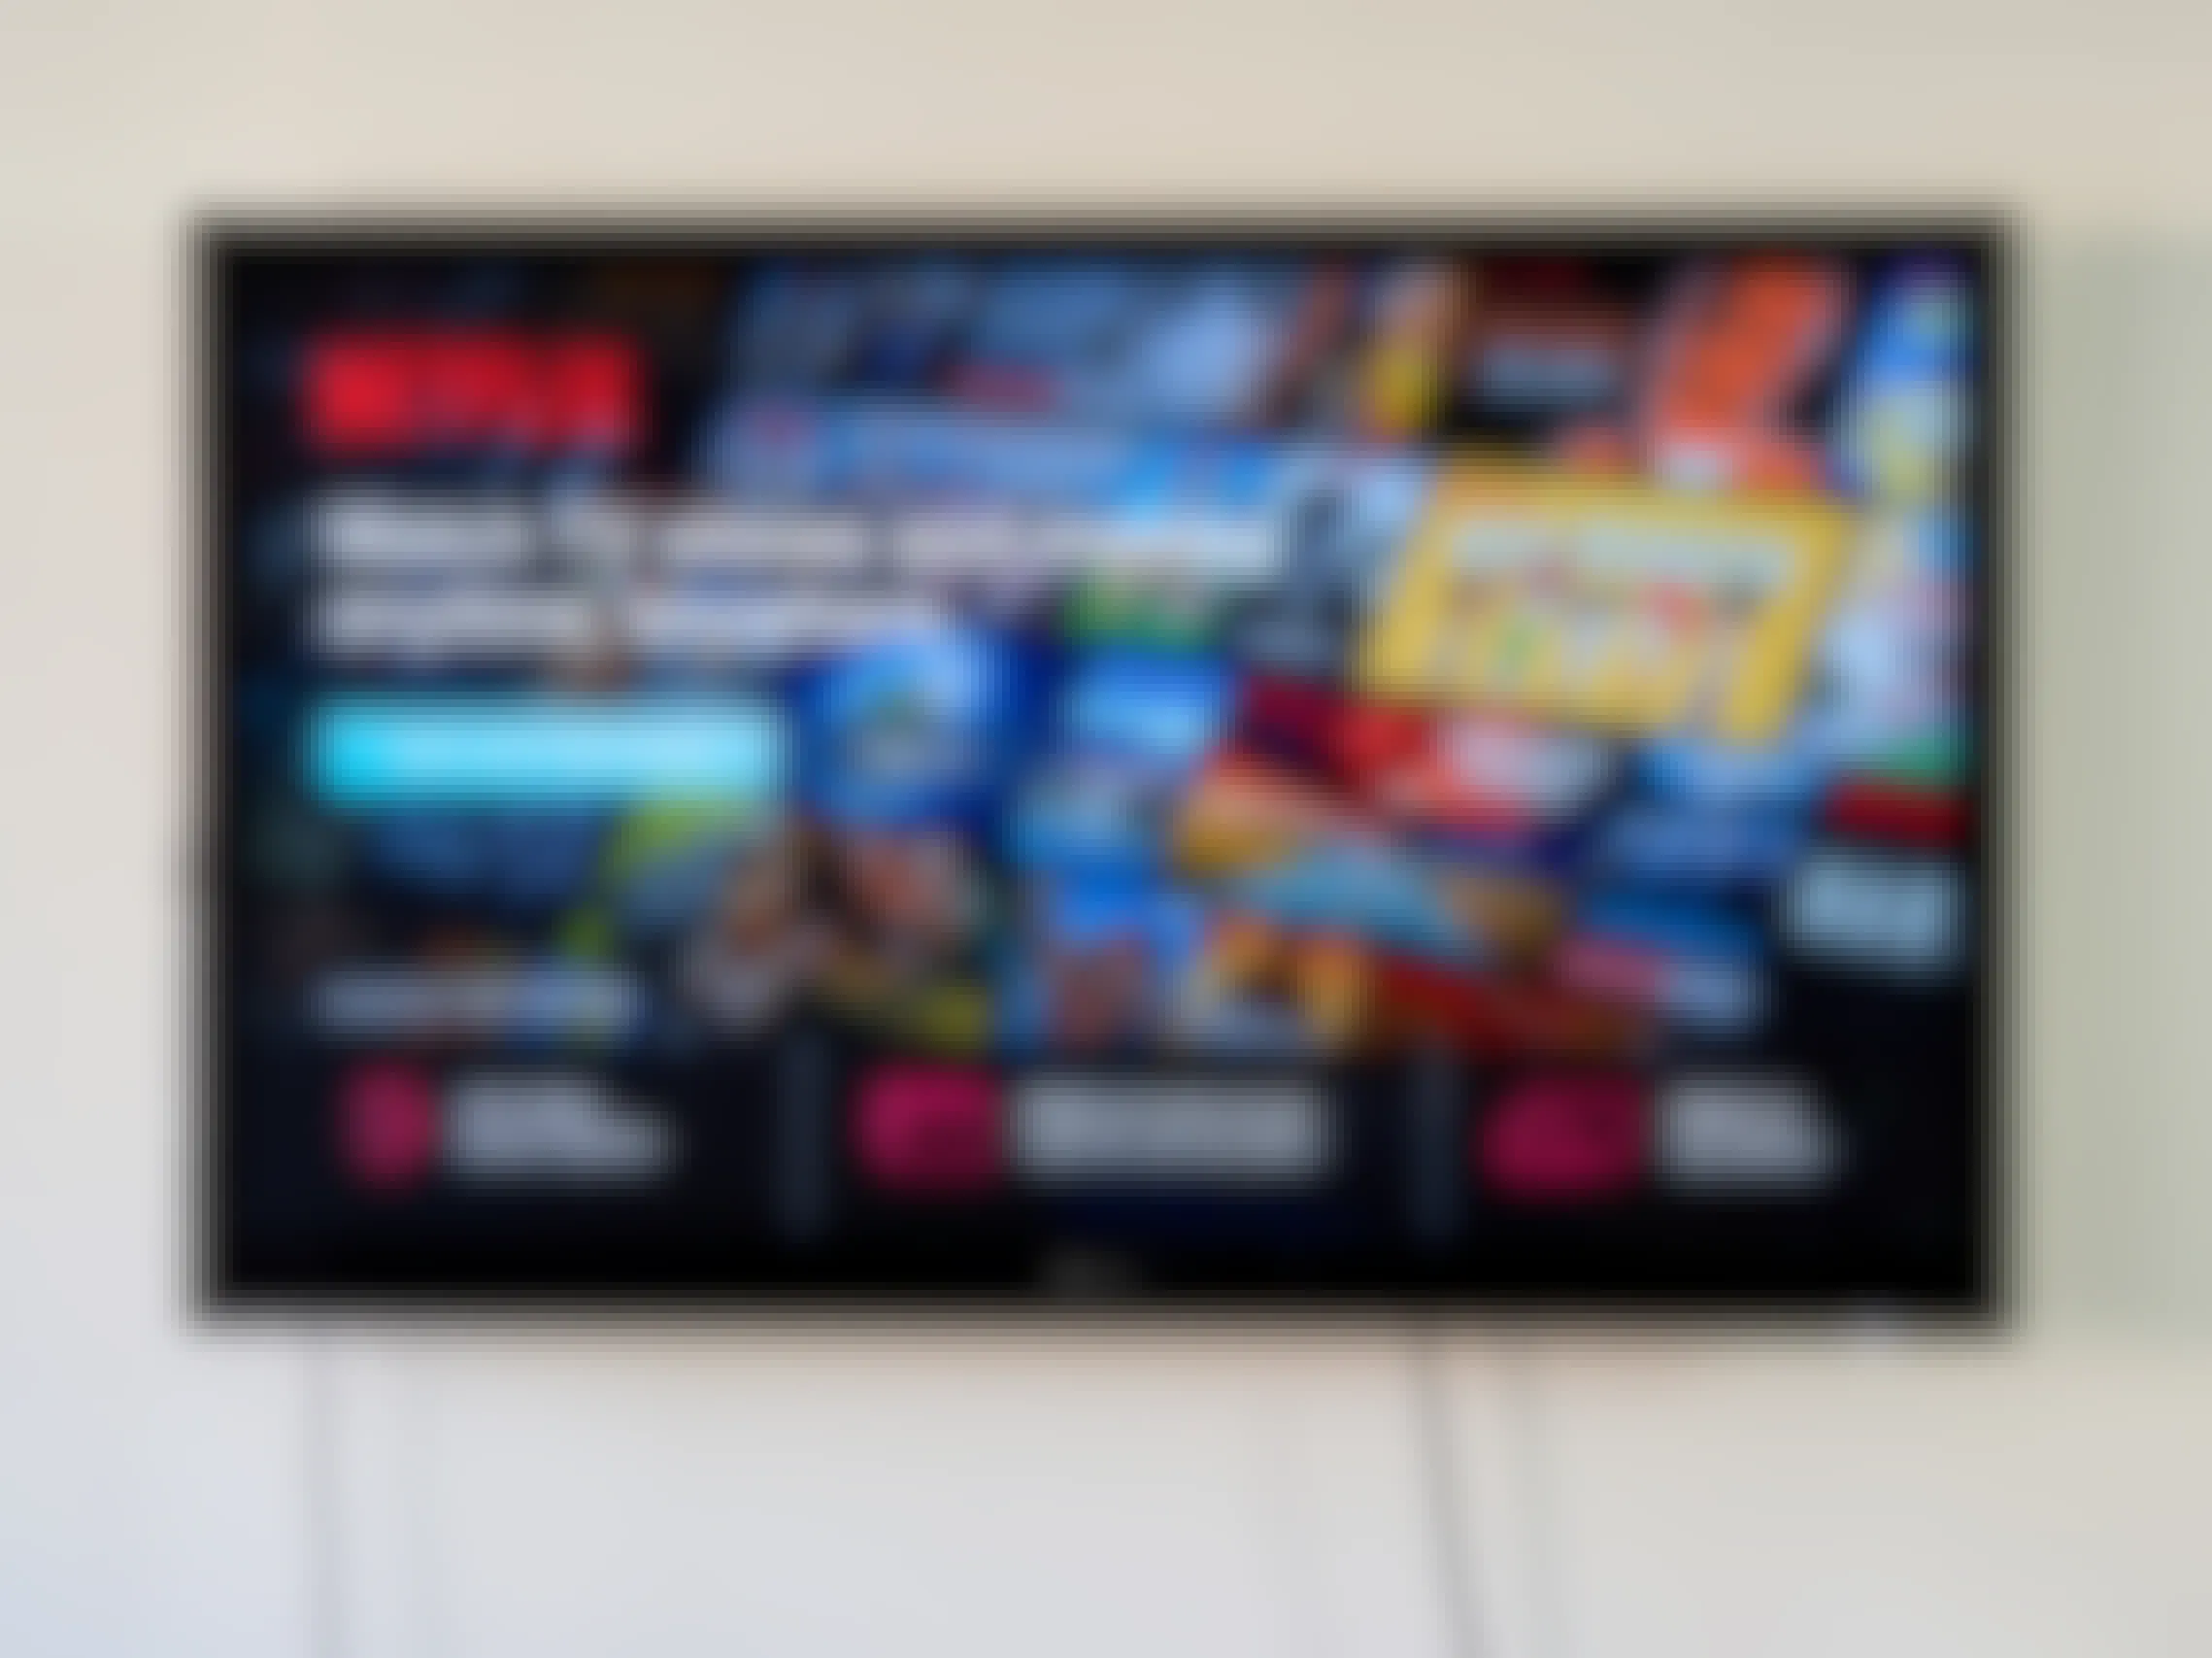 Netflix streaming service on a wall mounted tv